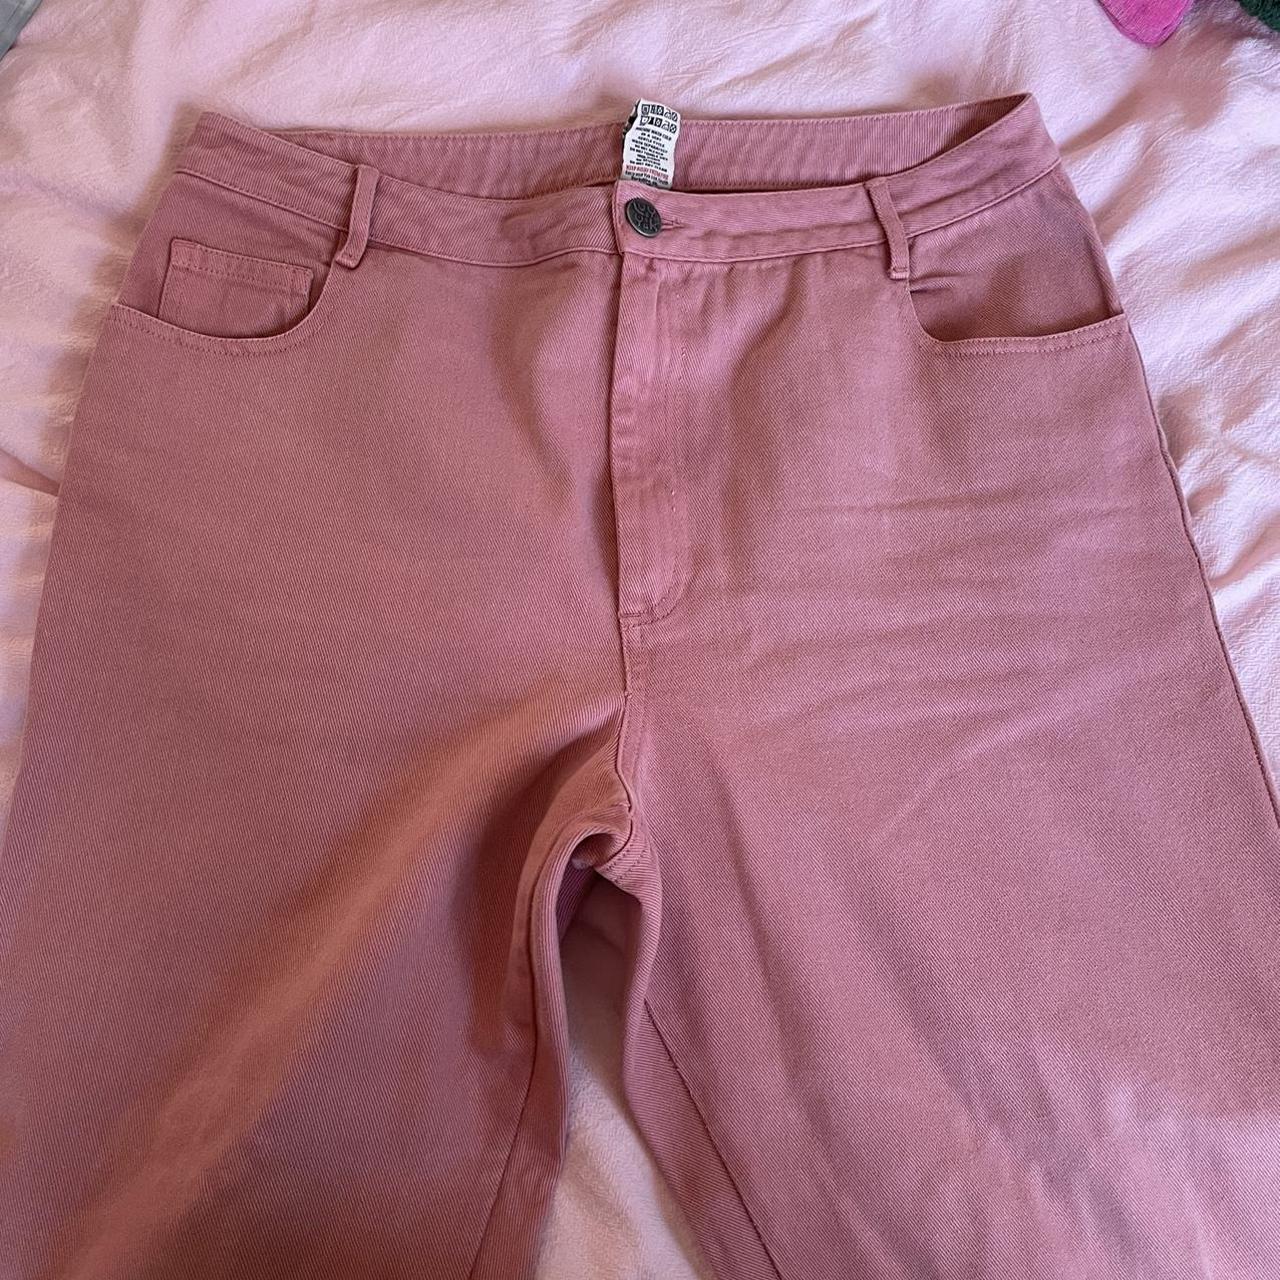 Lucy and Yak Women's Pink Jeans | Depop